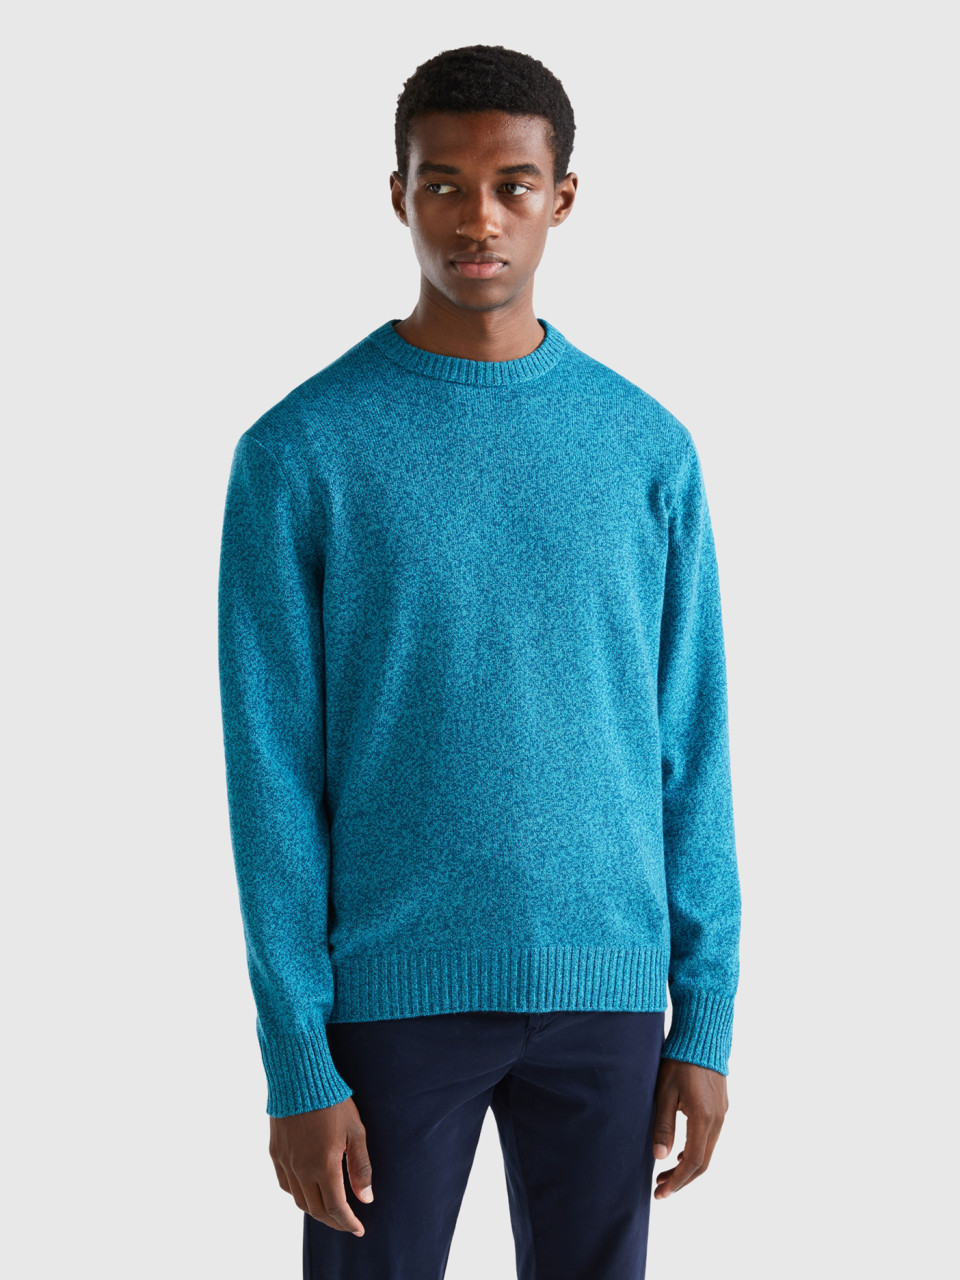 Benetton, Crew Neck Sweater In Cashmere And Wool Blend, Blue, Men